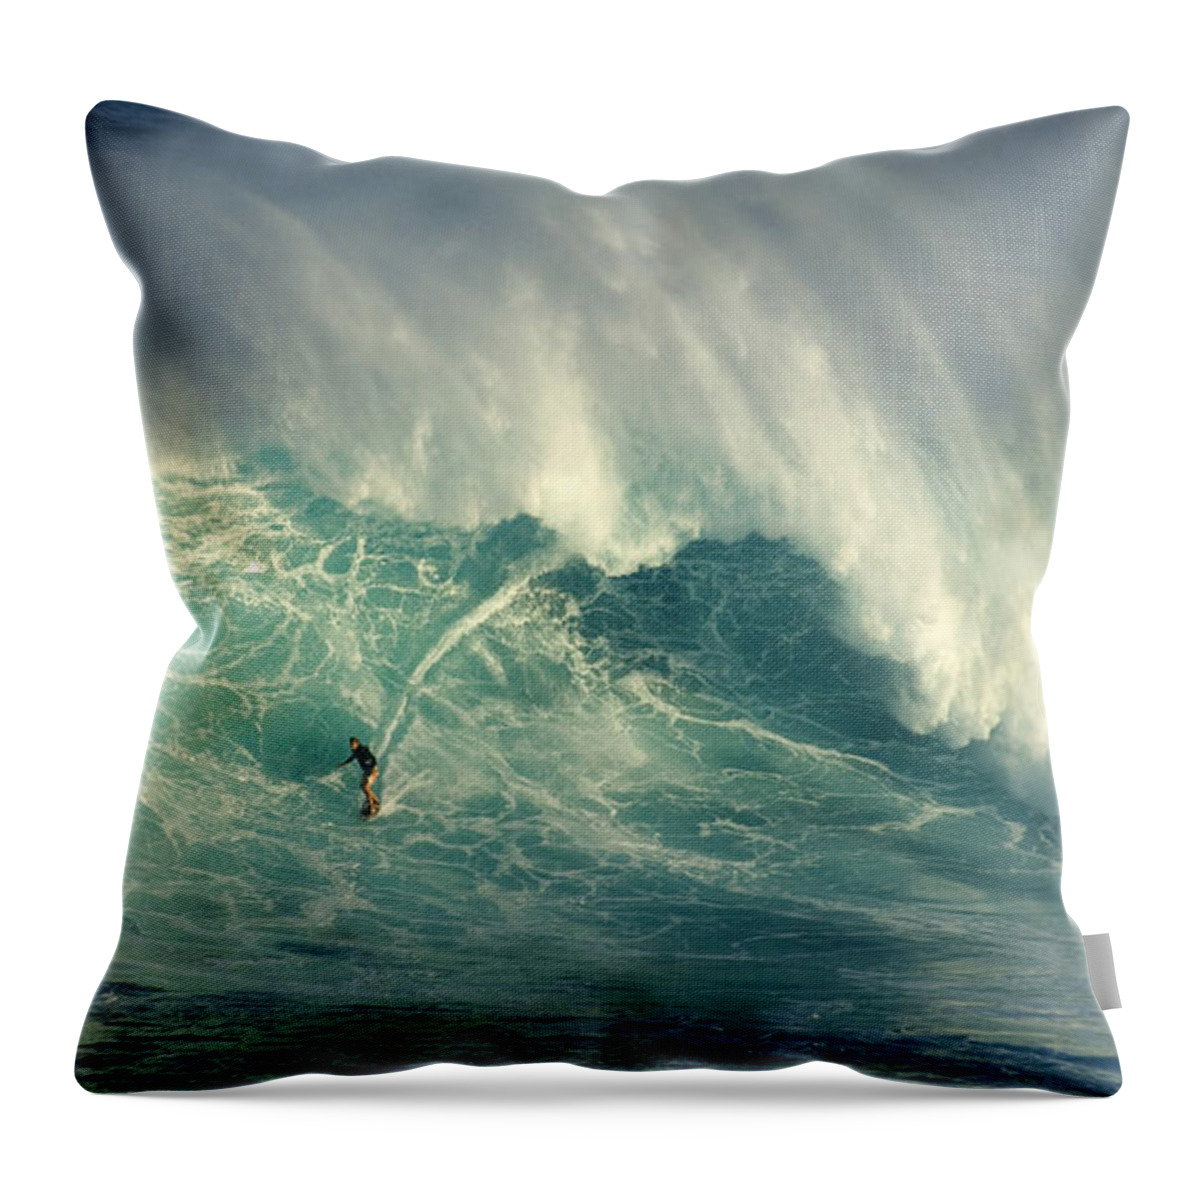 Extreme Sports Throw Pillow featuring the photograph Surfing The Green Zone by Bob Christopher